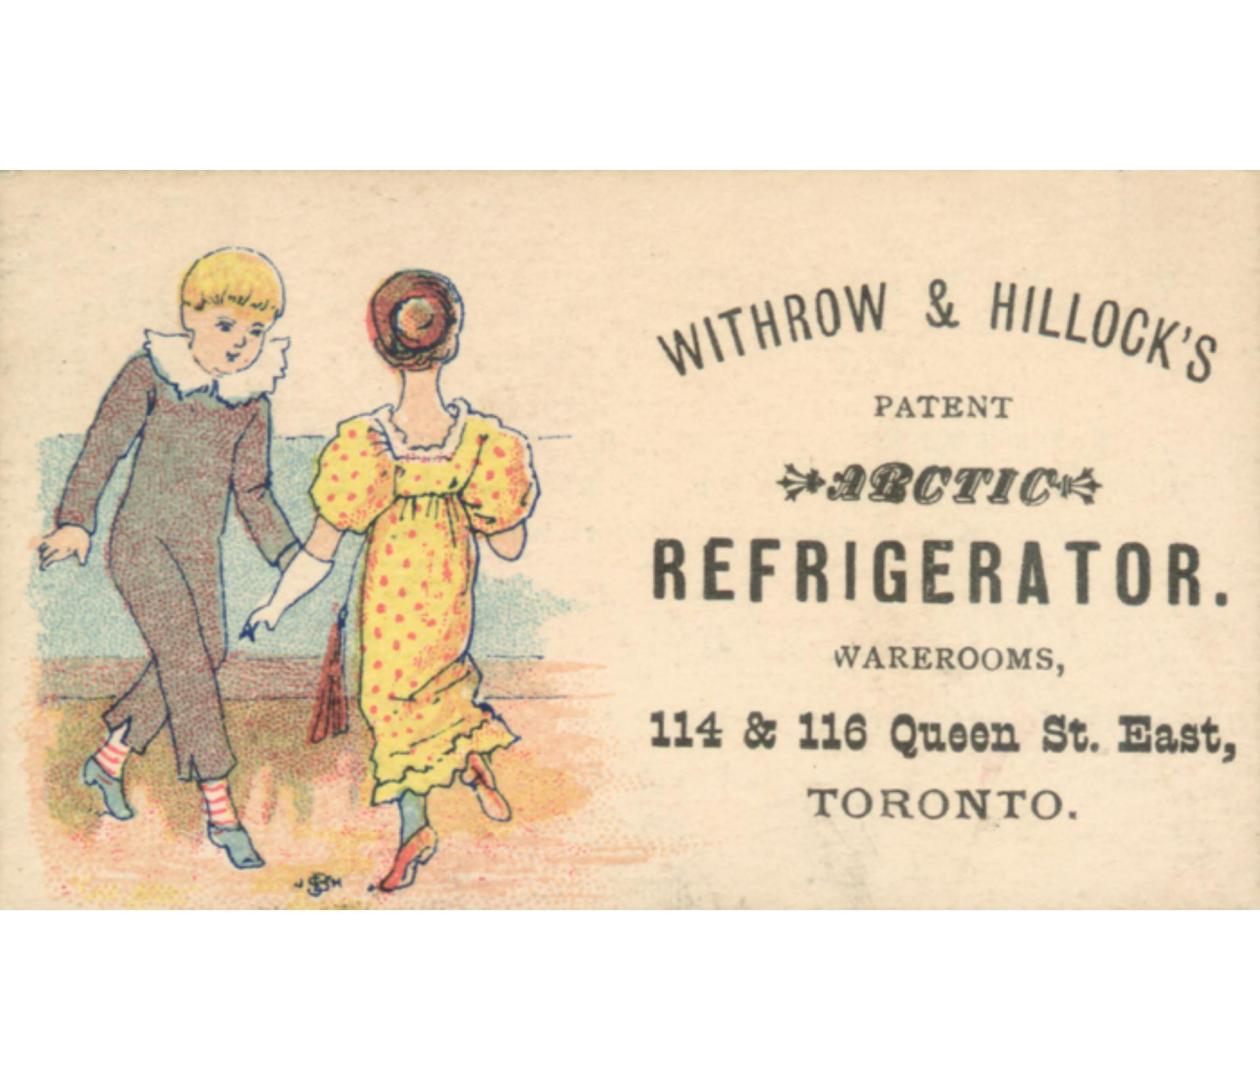 Withrow & Hillock's patent Arctic refrigerator